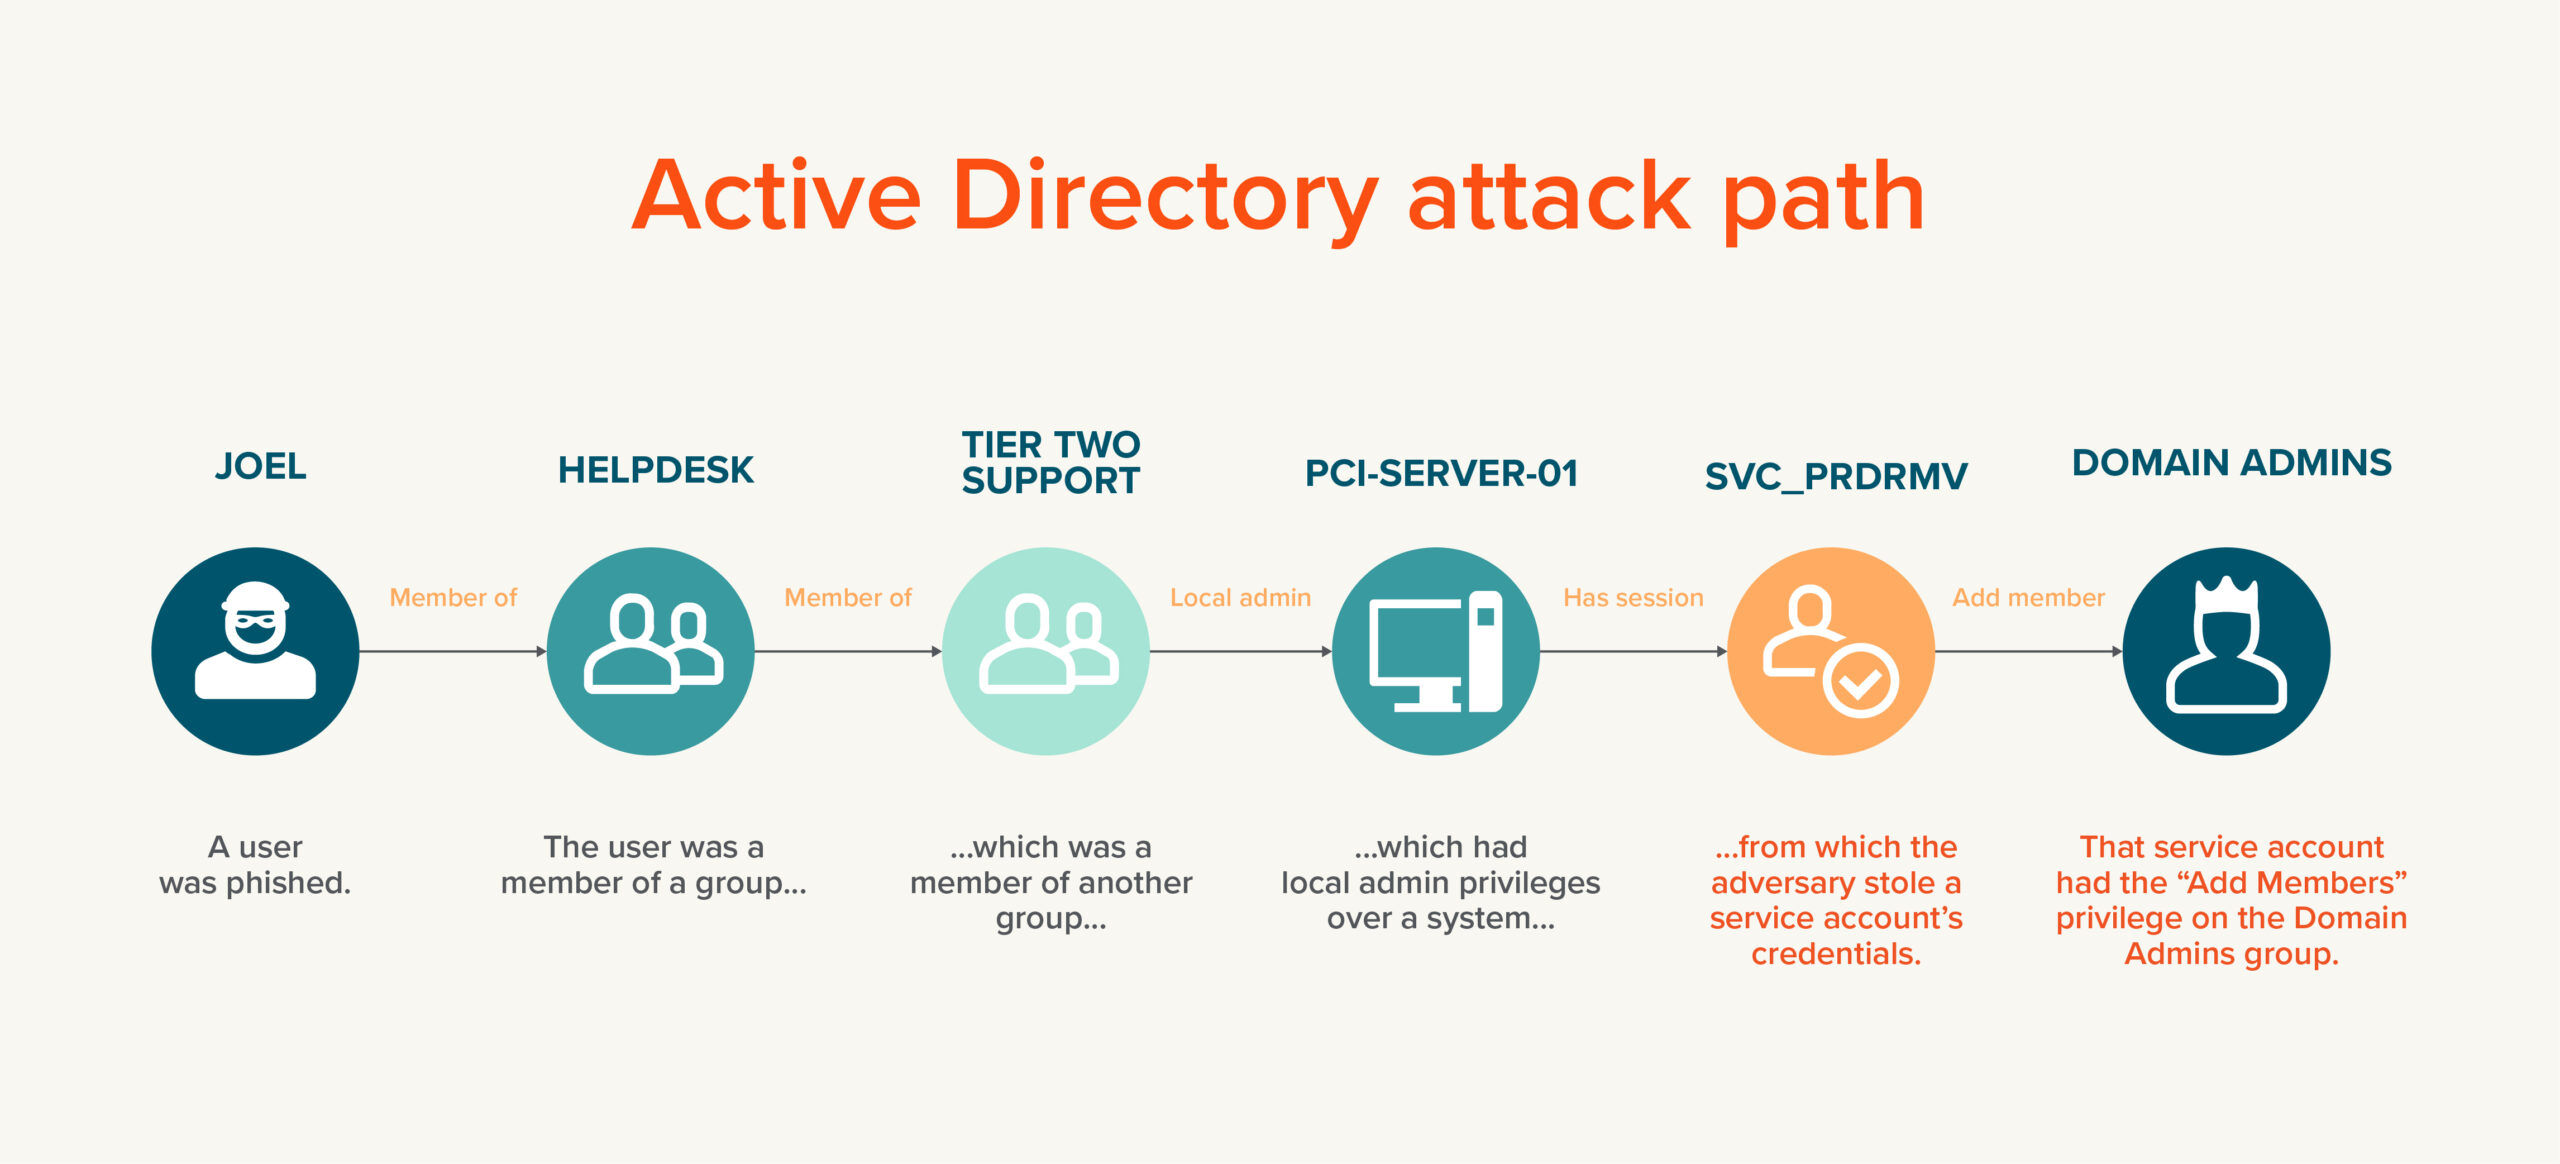 Attack paths targeting Active Directory